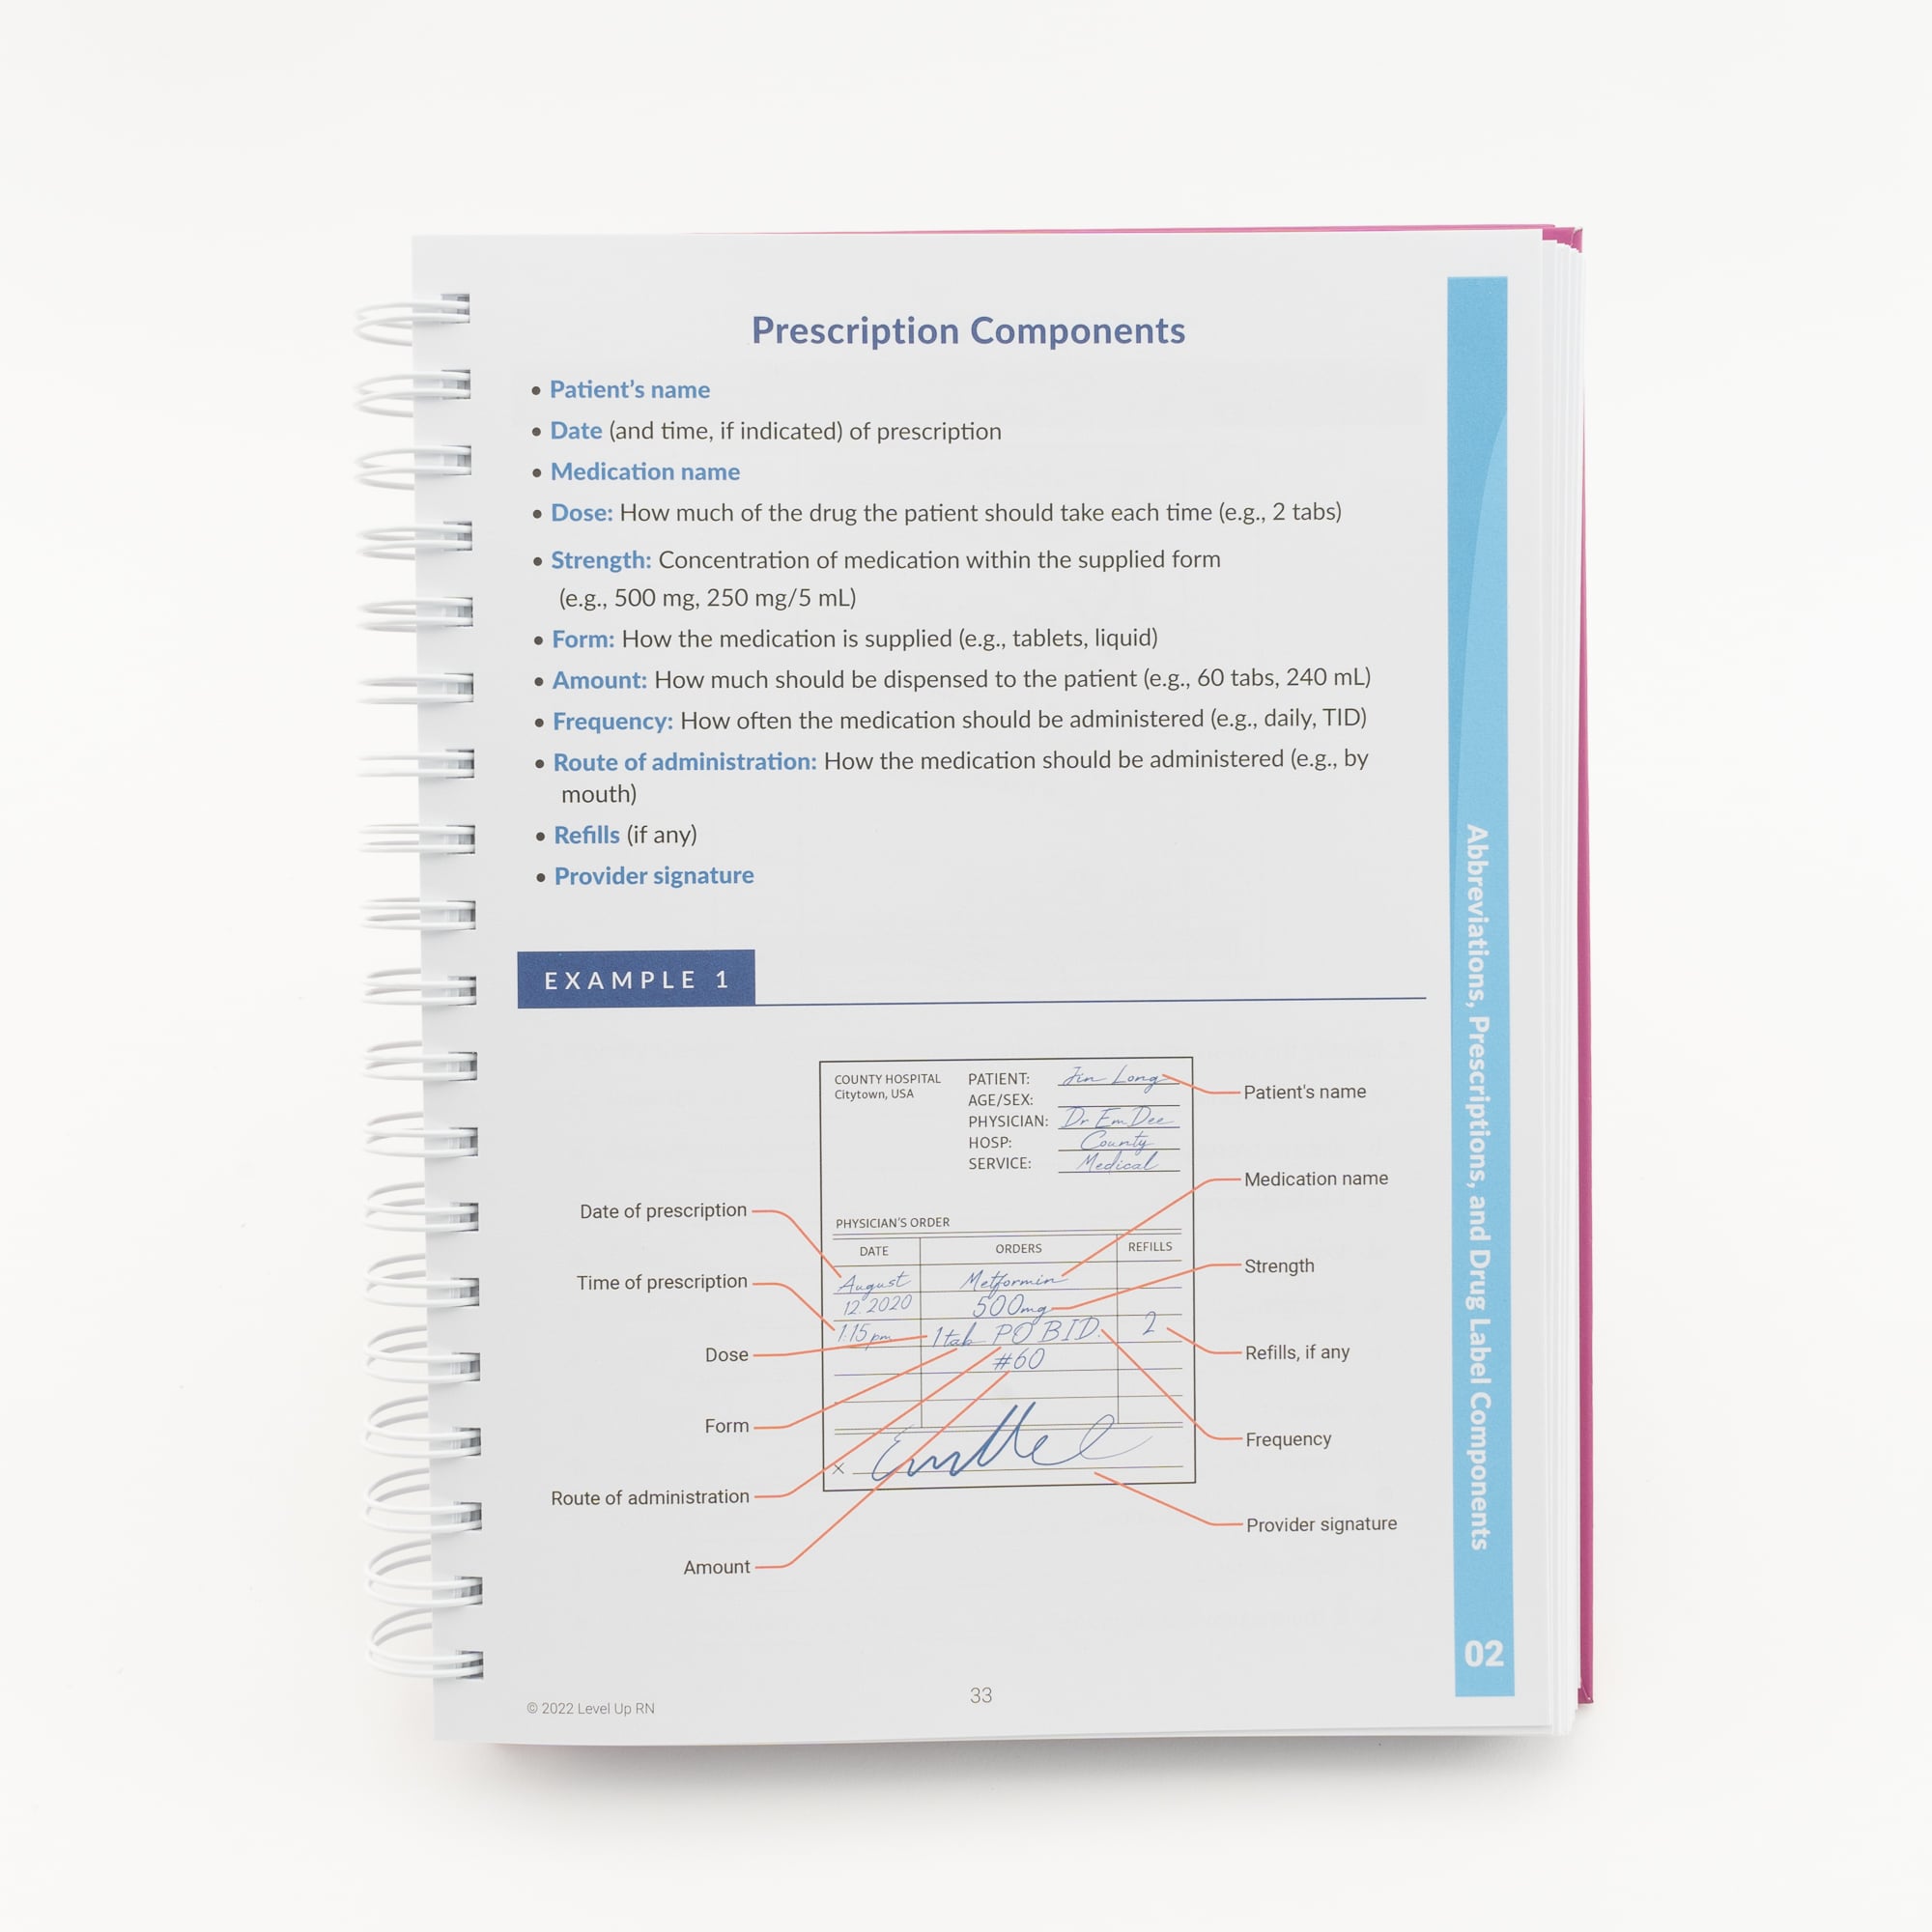 Prescription components in the dosage calculations workbook